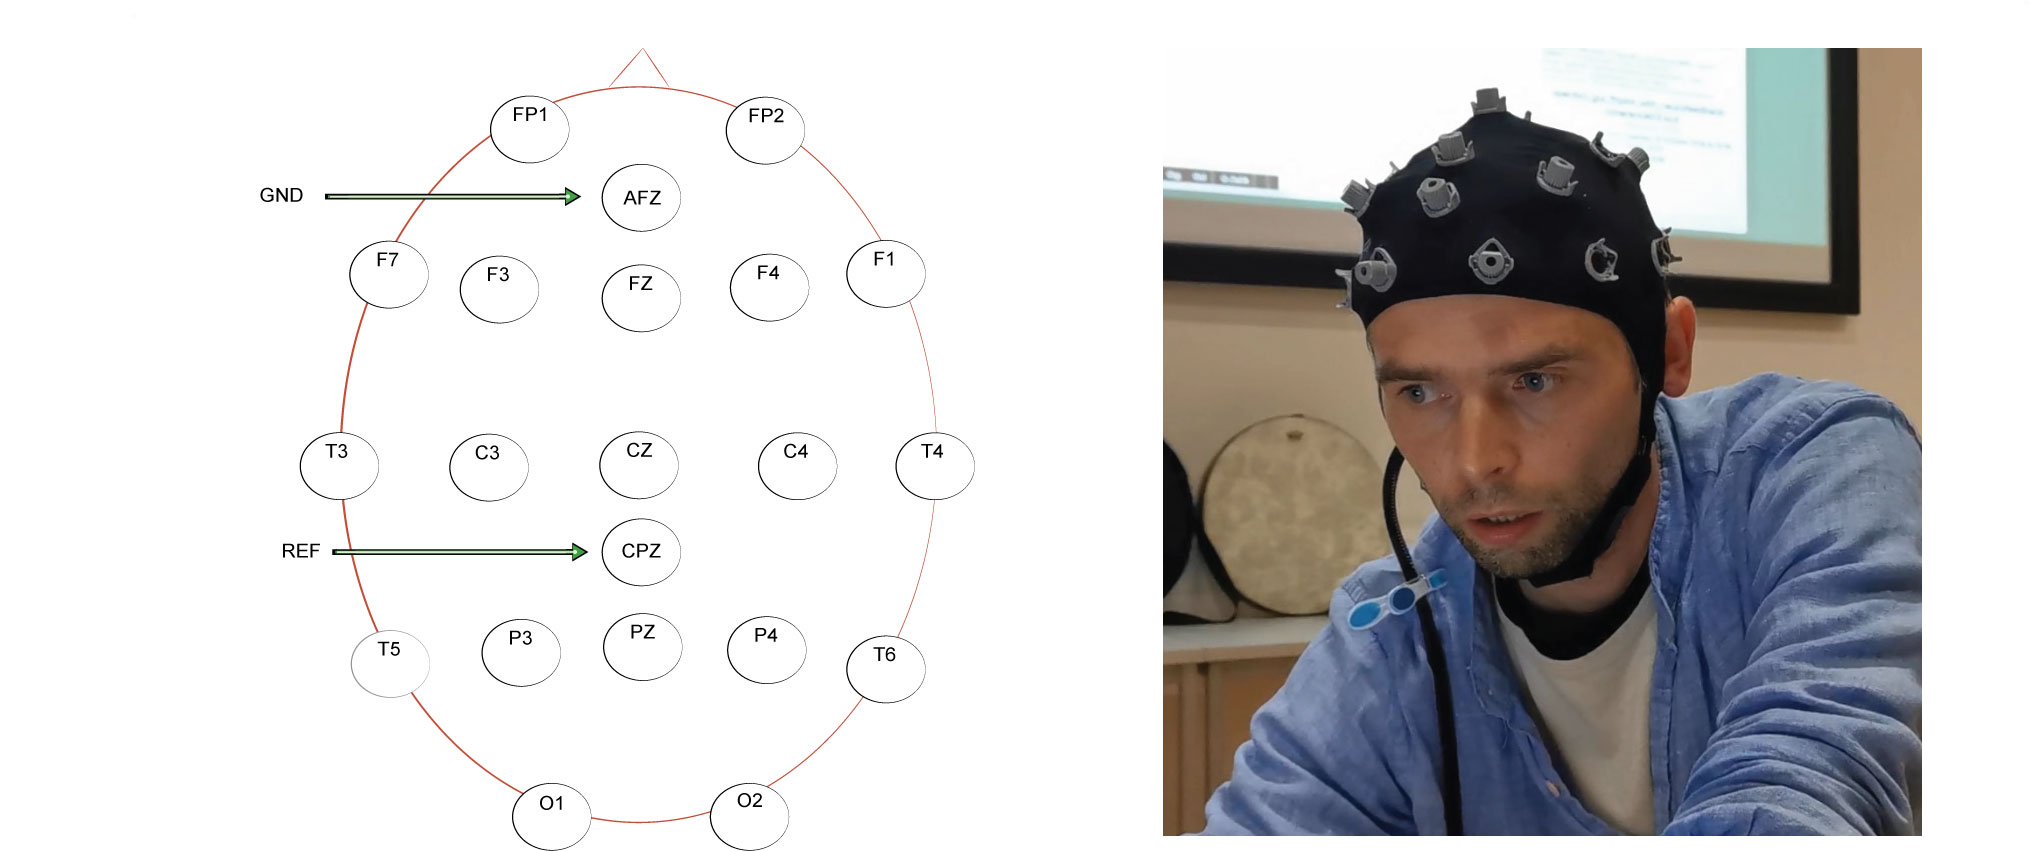 Available electrode locations on the Greentek Gelfree EEG cap, showing the ground (GND) and reference (REF) used in this research (left), and photograph with this cap on my head and cable loom clipped to my shirt (right).